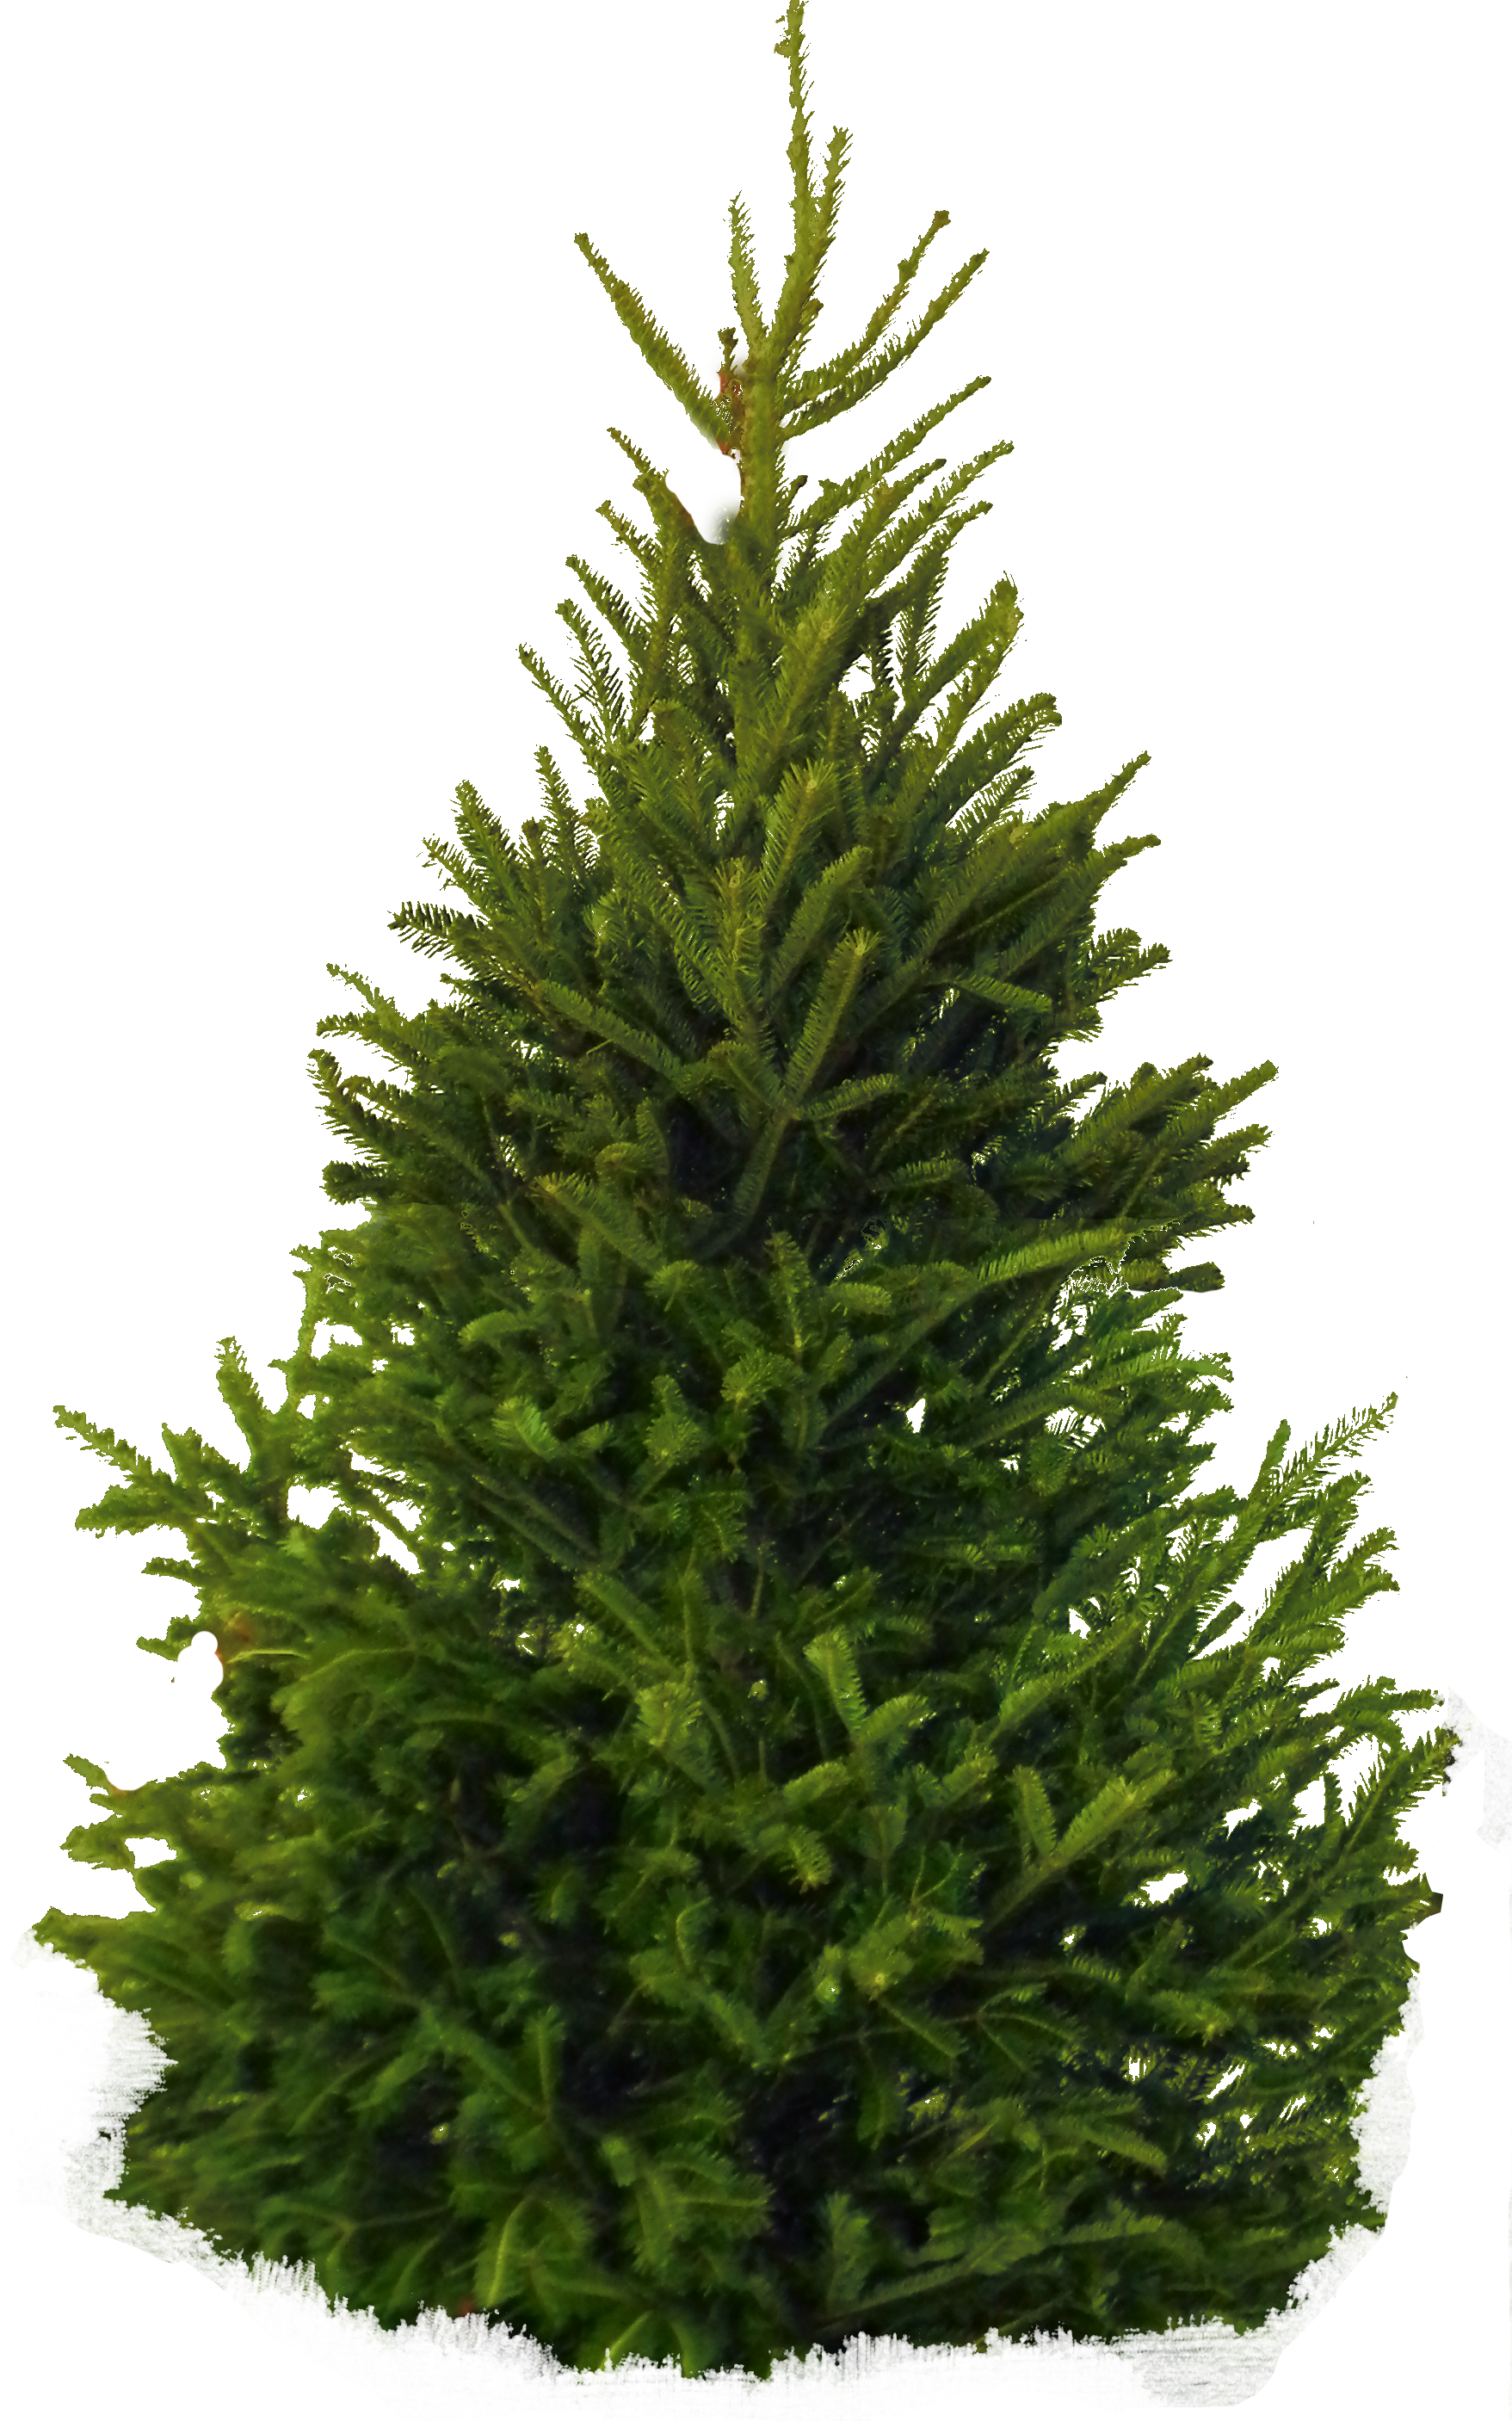 Fir-Tree Png Clipart PNG Image